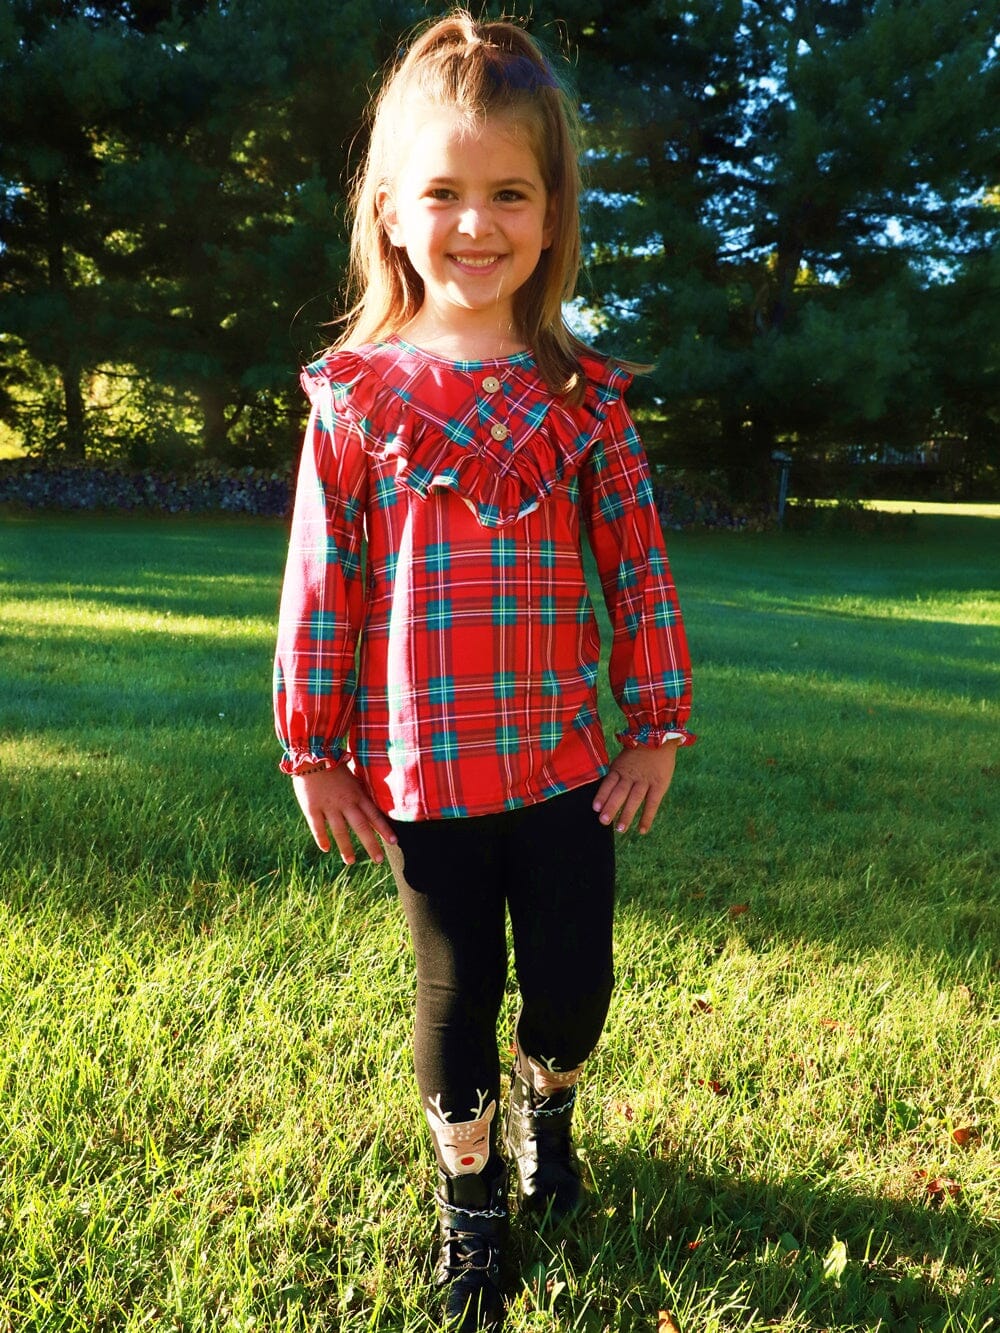 Perfectly Plaid Reindeer Christmas Leggings Outfit